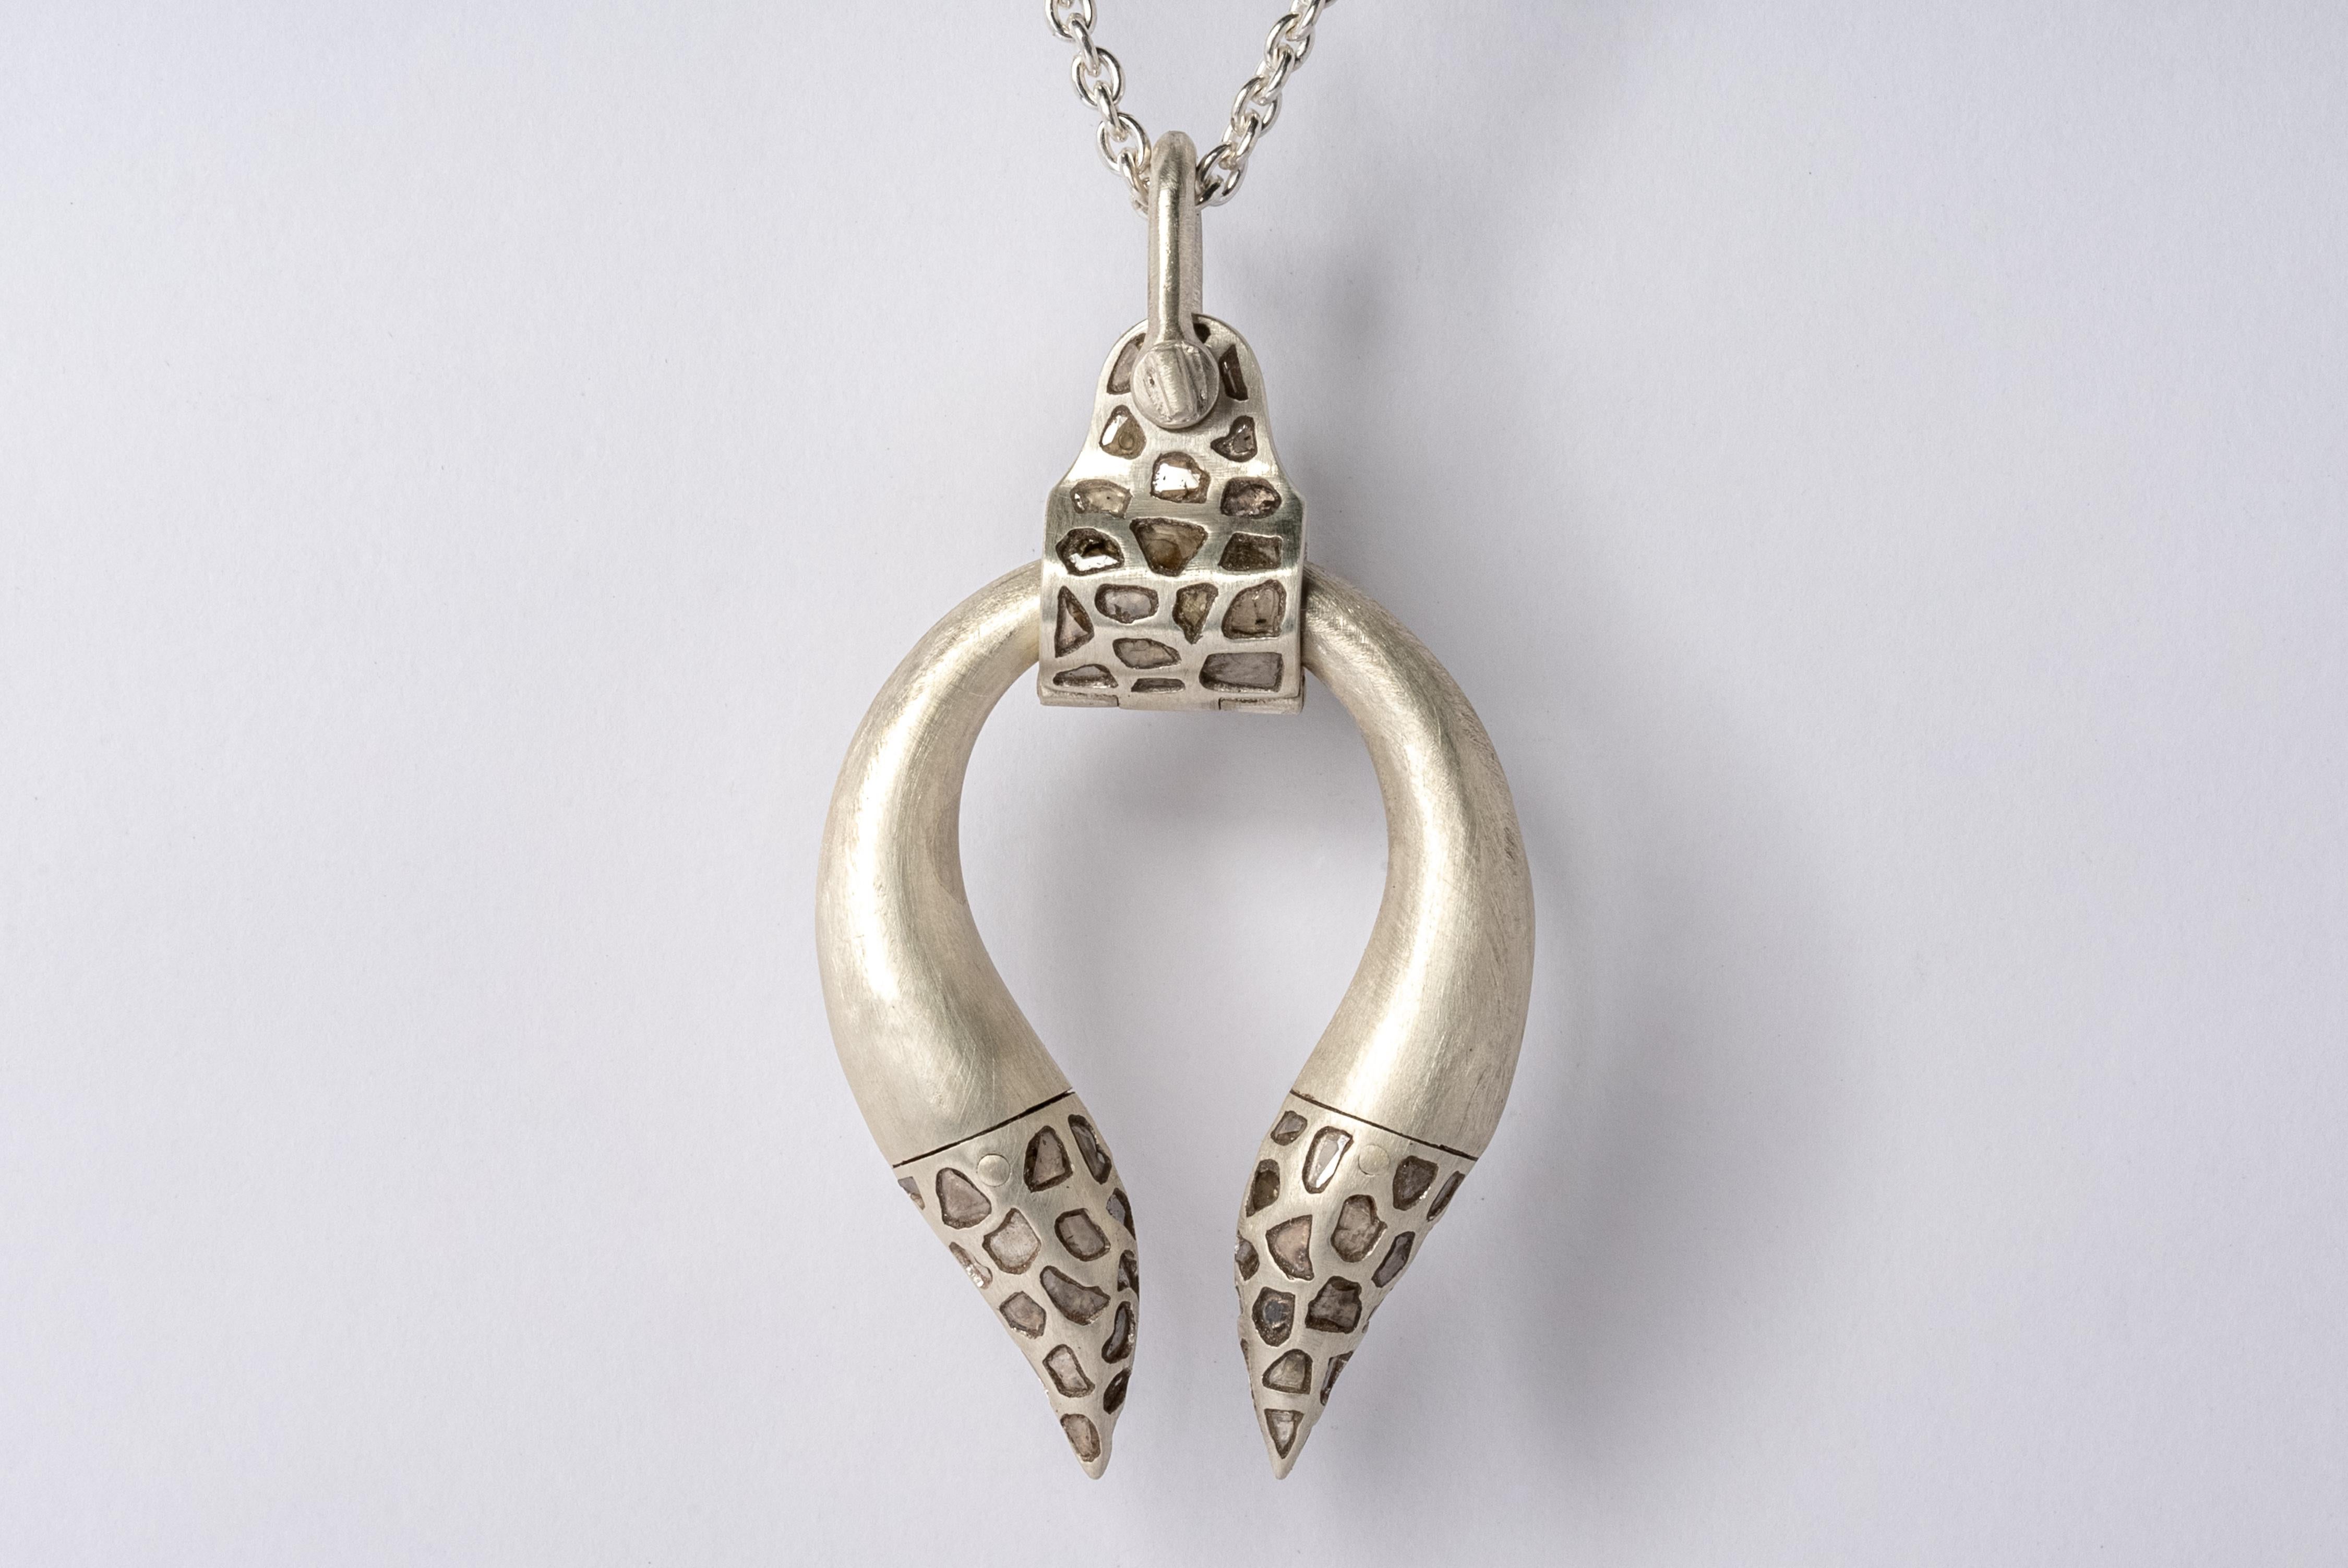 Pendant necklace in the shape of Hathor in sterling silver and slabs of rough diamond set in mega pave setting. These slabs are removed from a larger chunk of diamond, it comes on a 74cm chain. Each stone fragment and shape are absolutely unique,